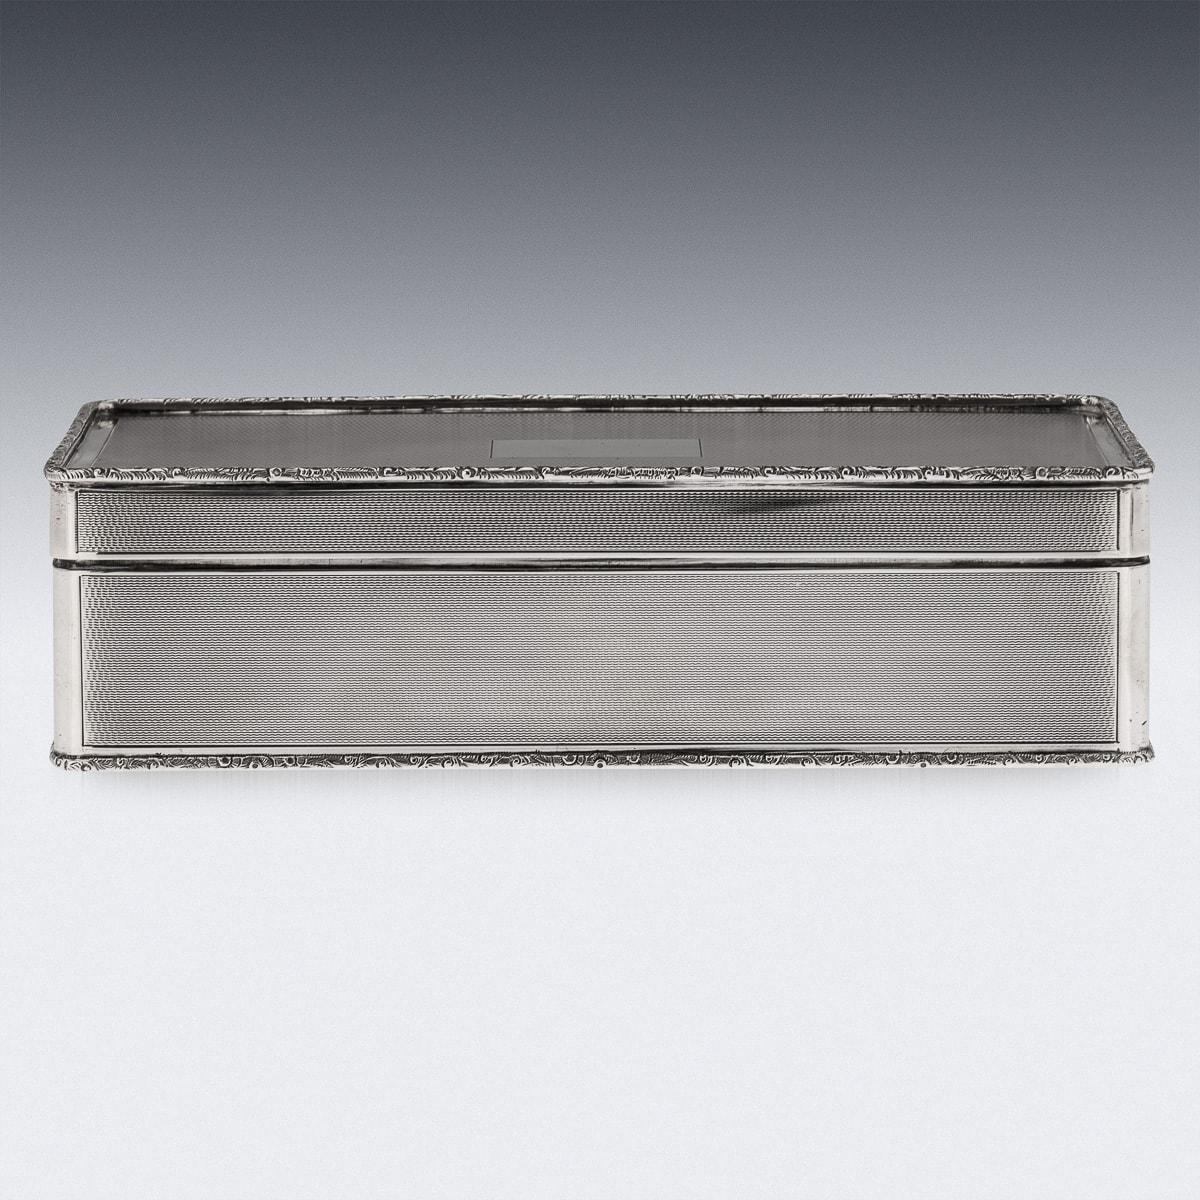 Elegant mid-20th Century English solid silver cigar box and match box holder, beautiful and very stylish engine-turned design, applied with a cast scroll boarders, These two high quality pieces make quite the double act. The simple and elegant